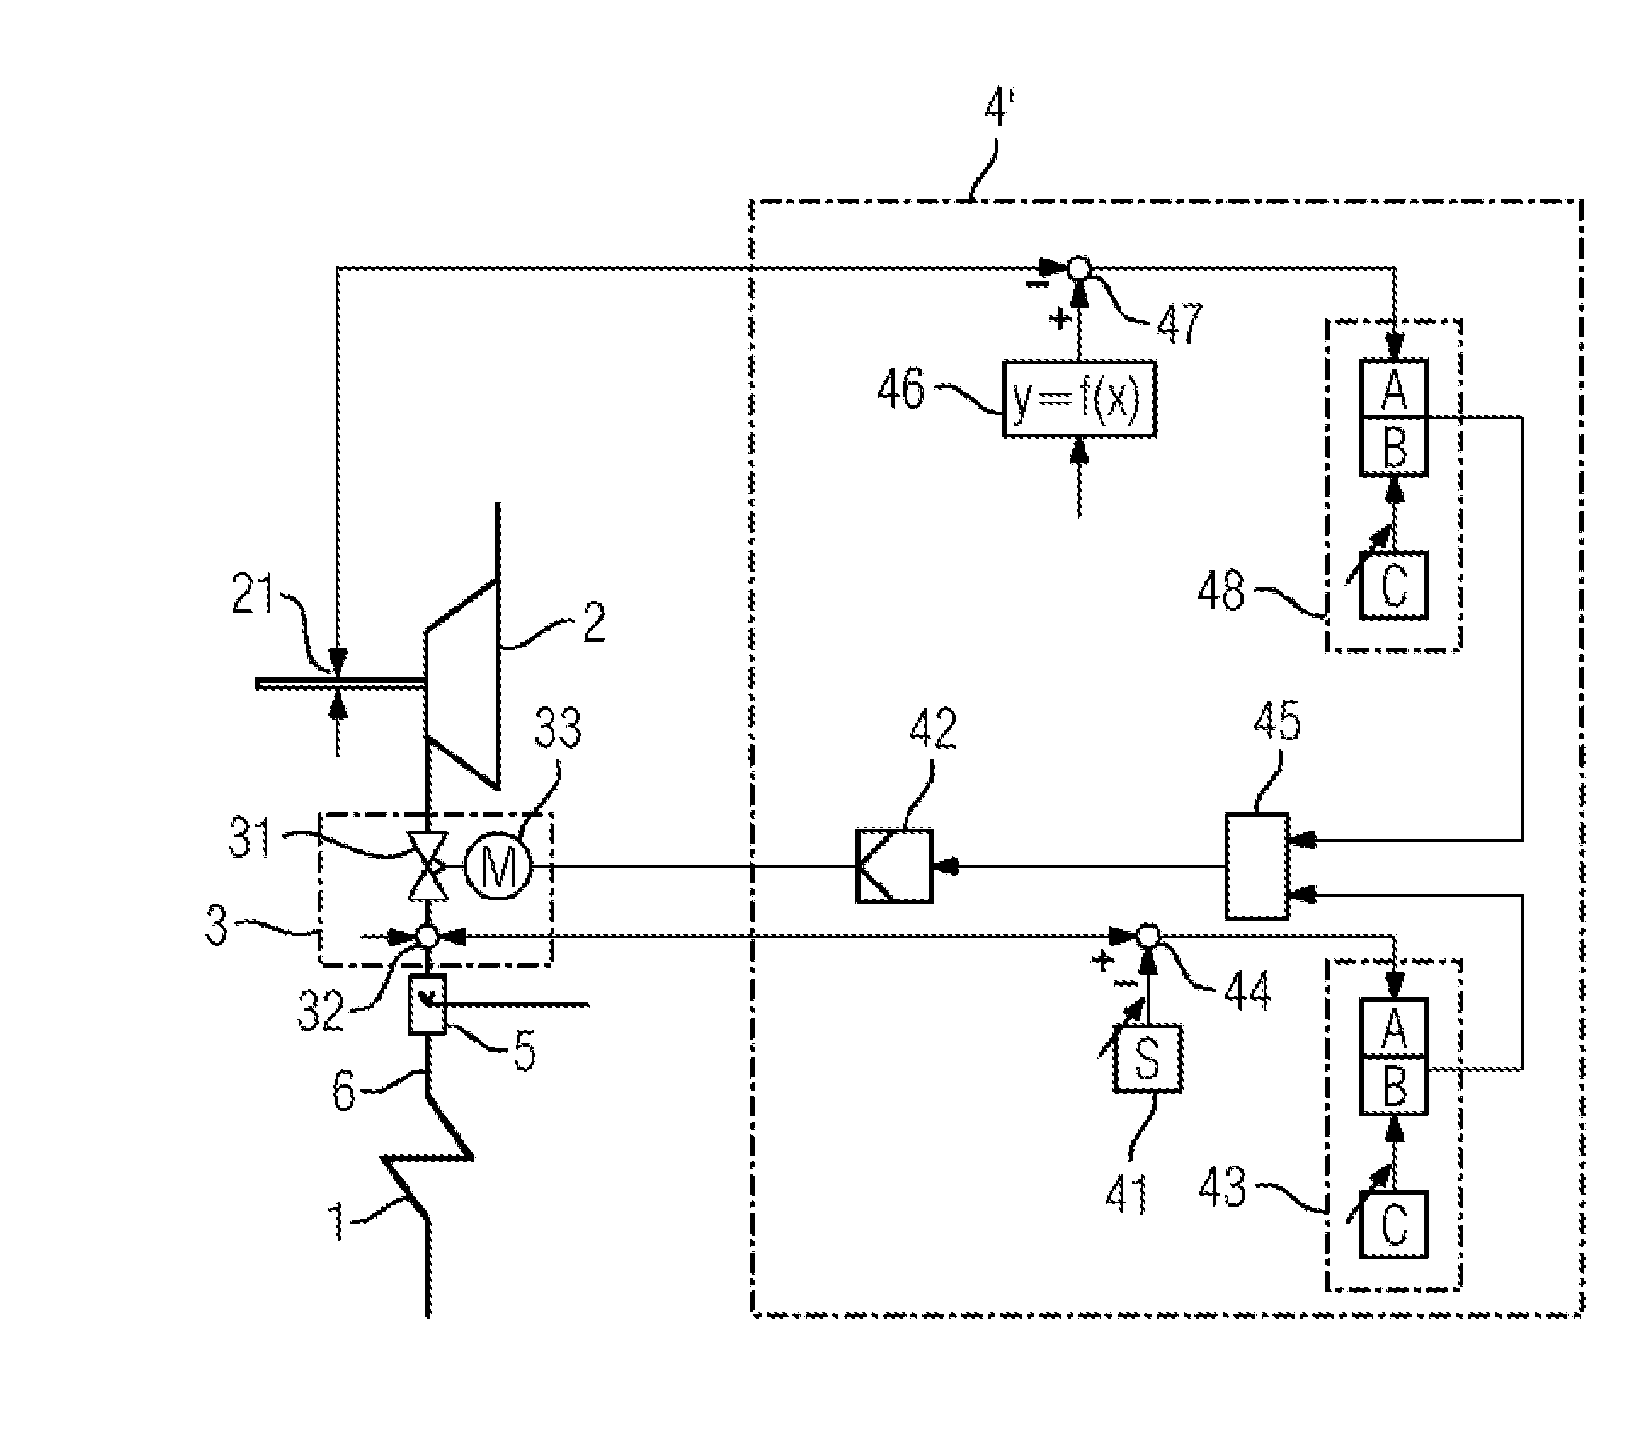 Operating method for an externally heated forced-flow steam generator